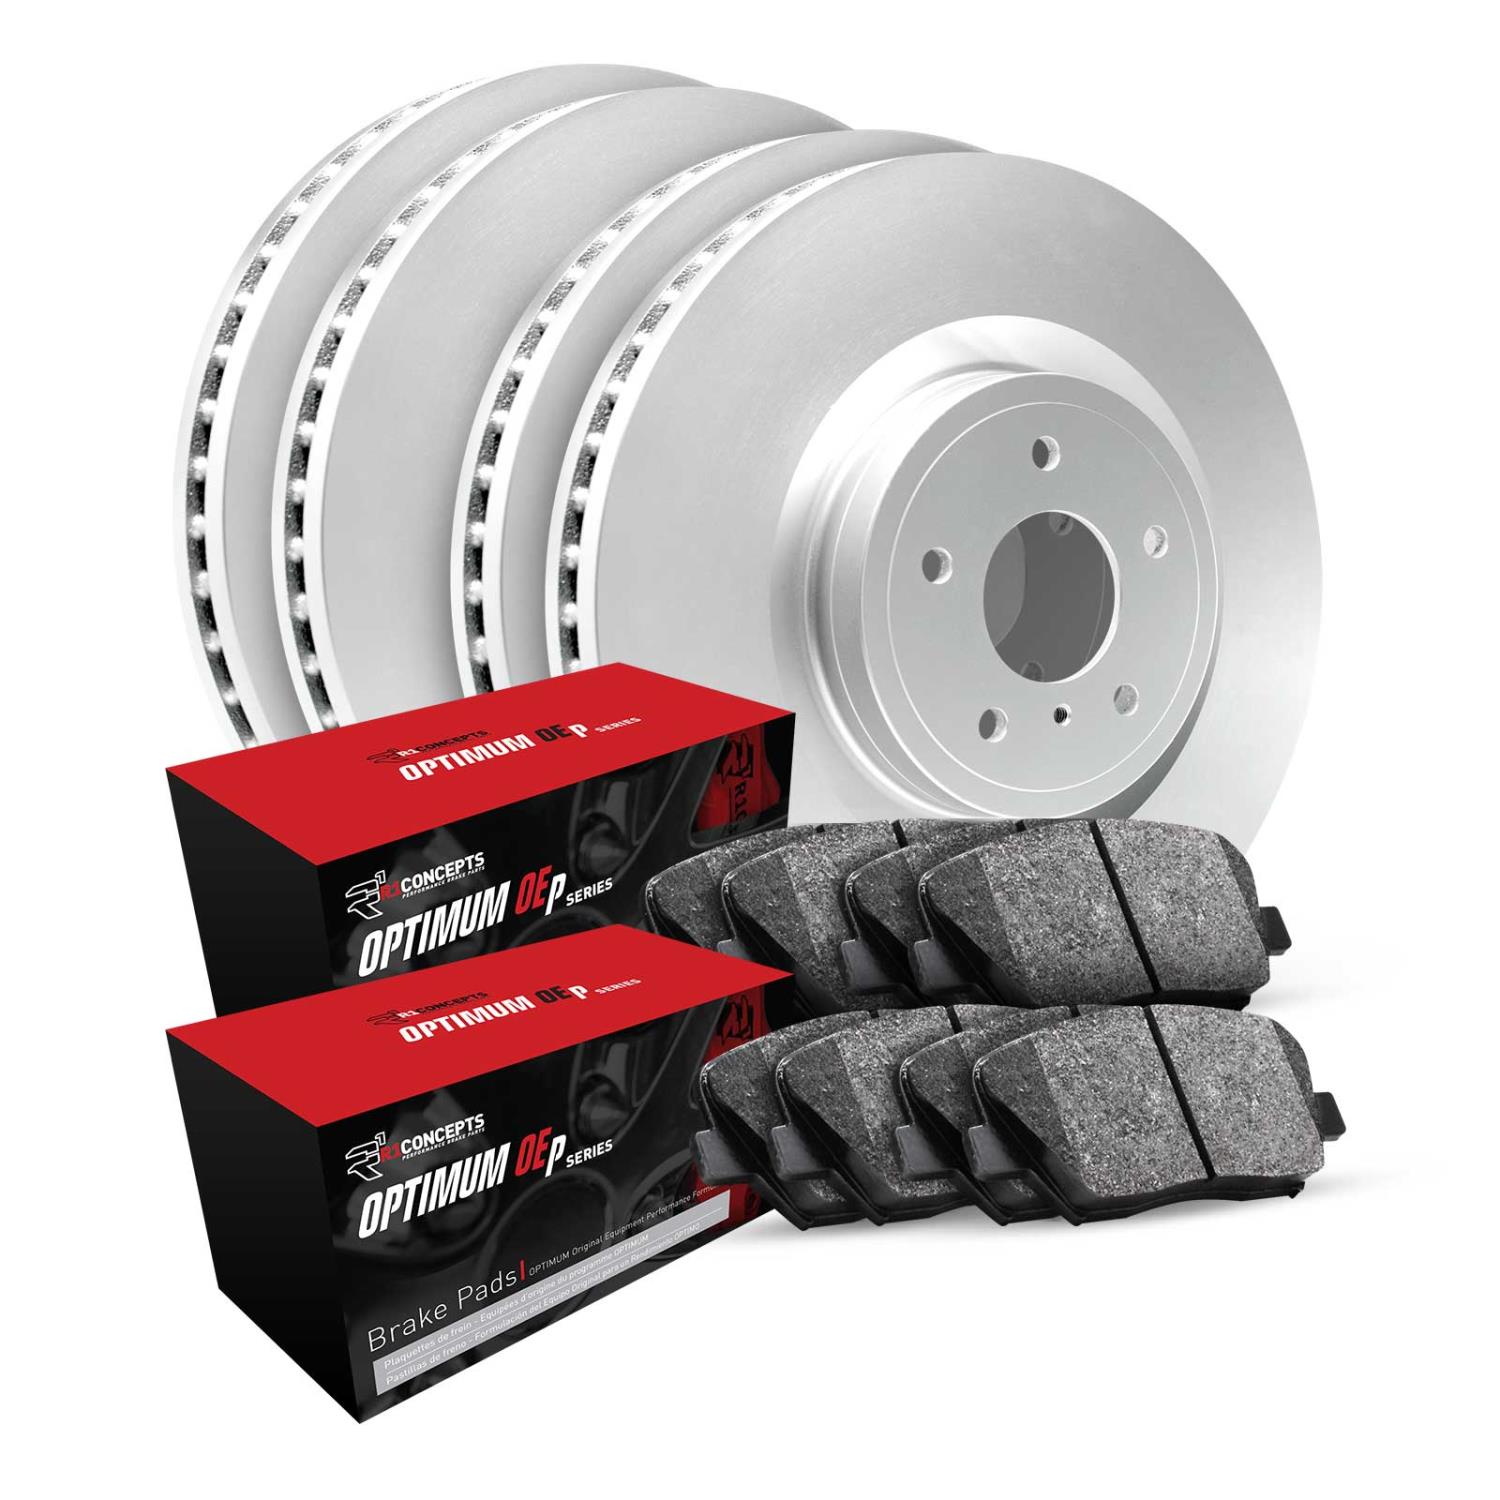 GEO-Carbon Brake Rotor Set w/Optimum OE Pads, 2005-2008 Fits Multiple Makes/Models, Position: Front & Rear